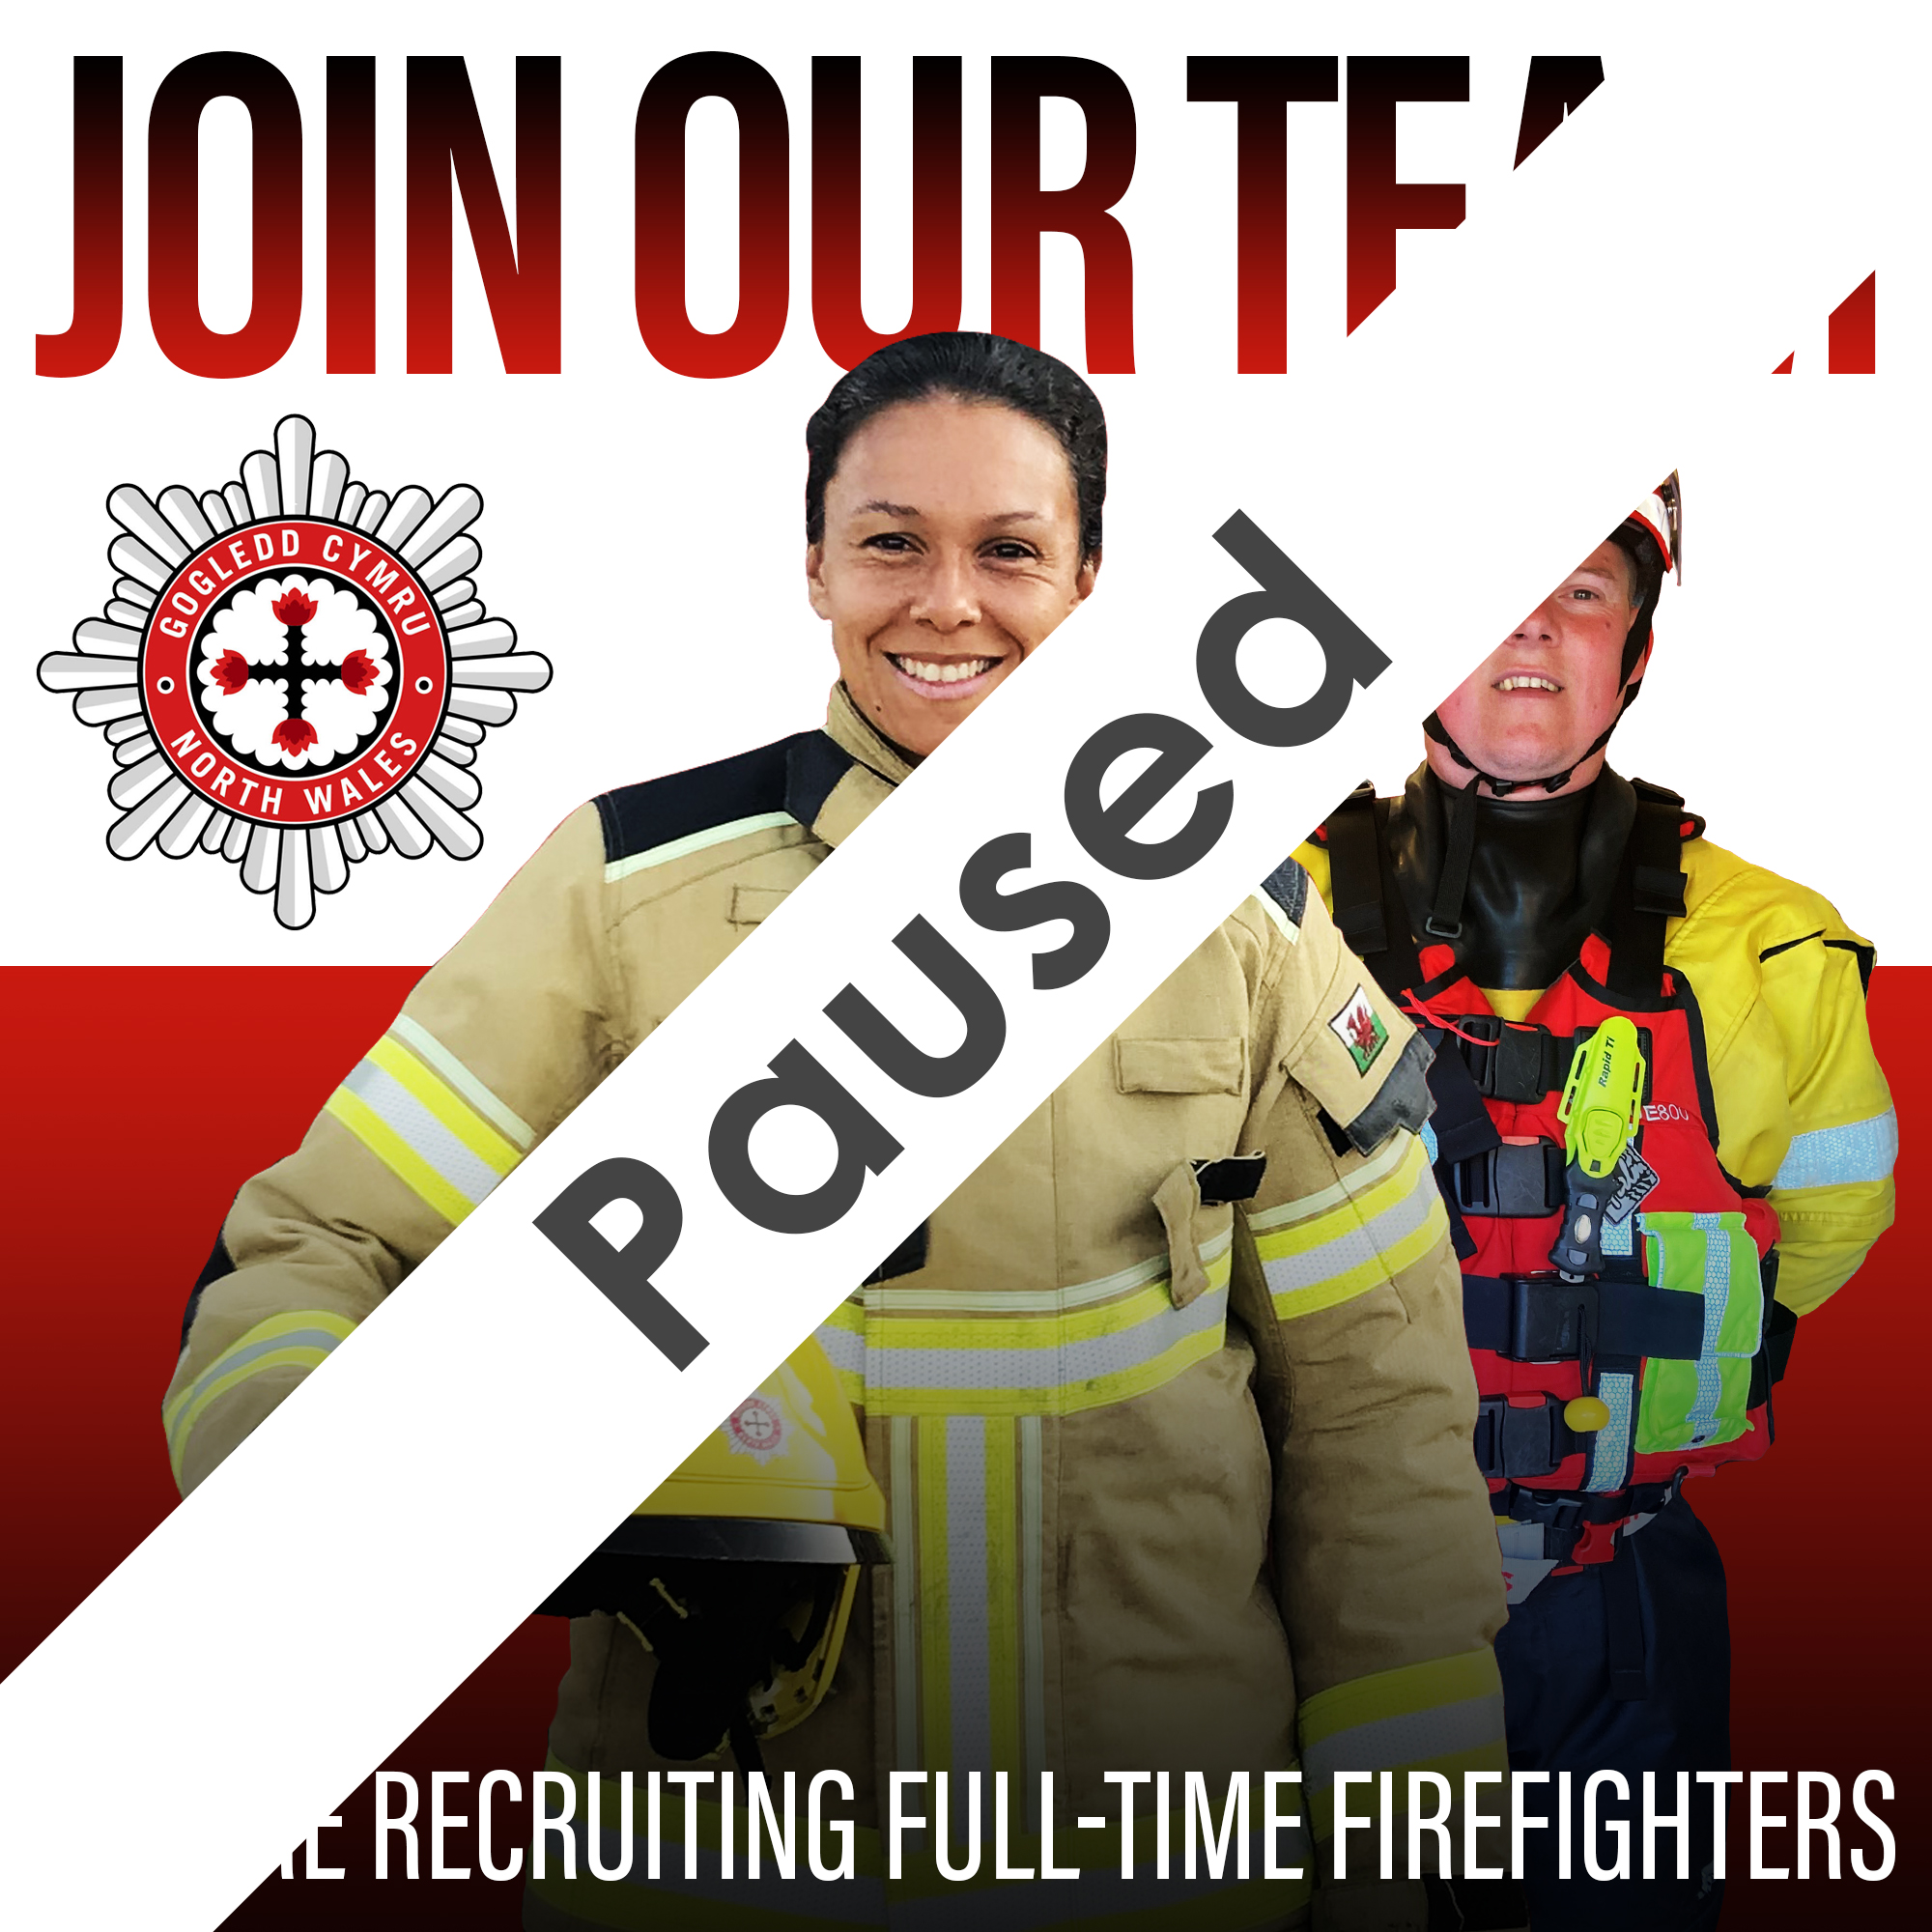 Important Update: Our full-time firefighter recruitment window will NOT be opening as planned 